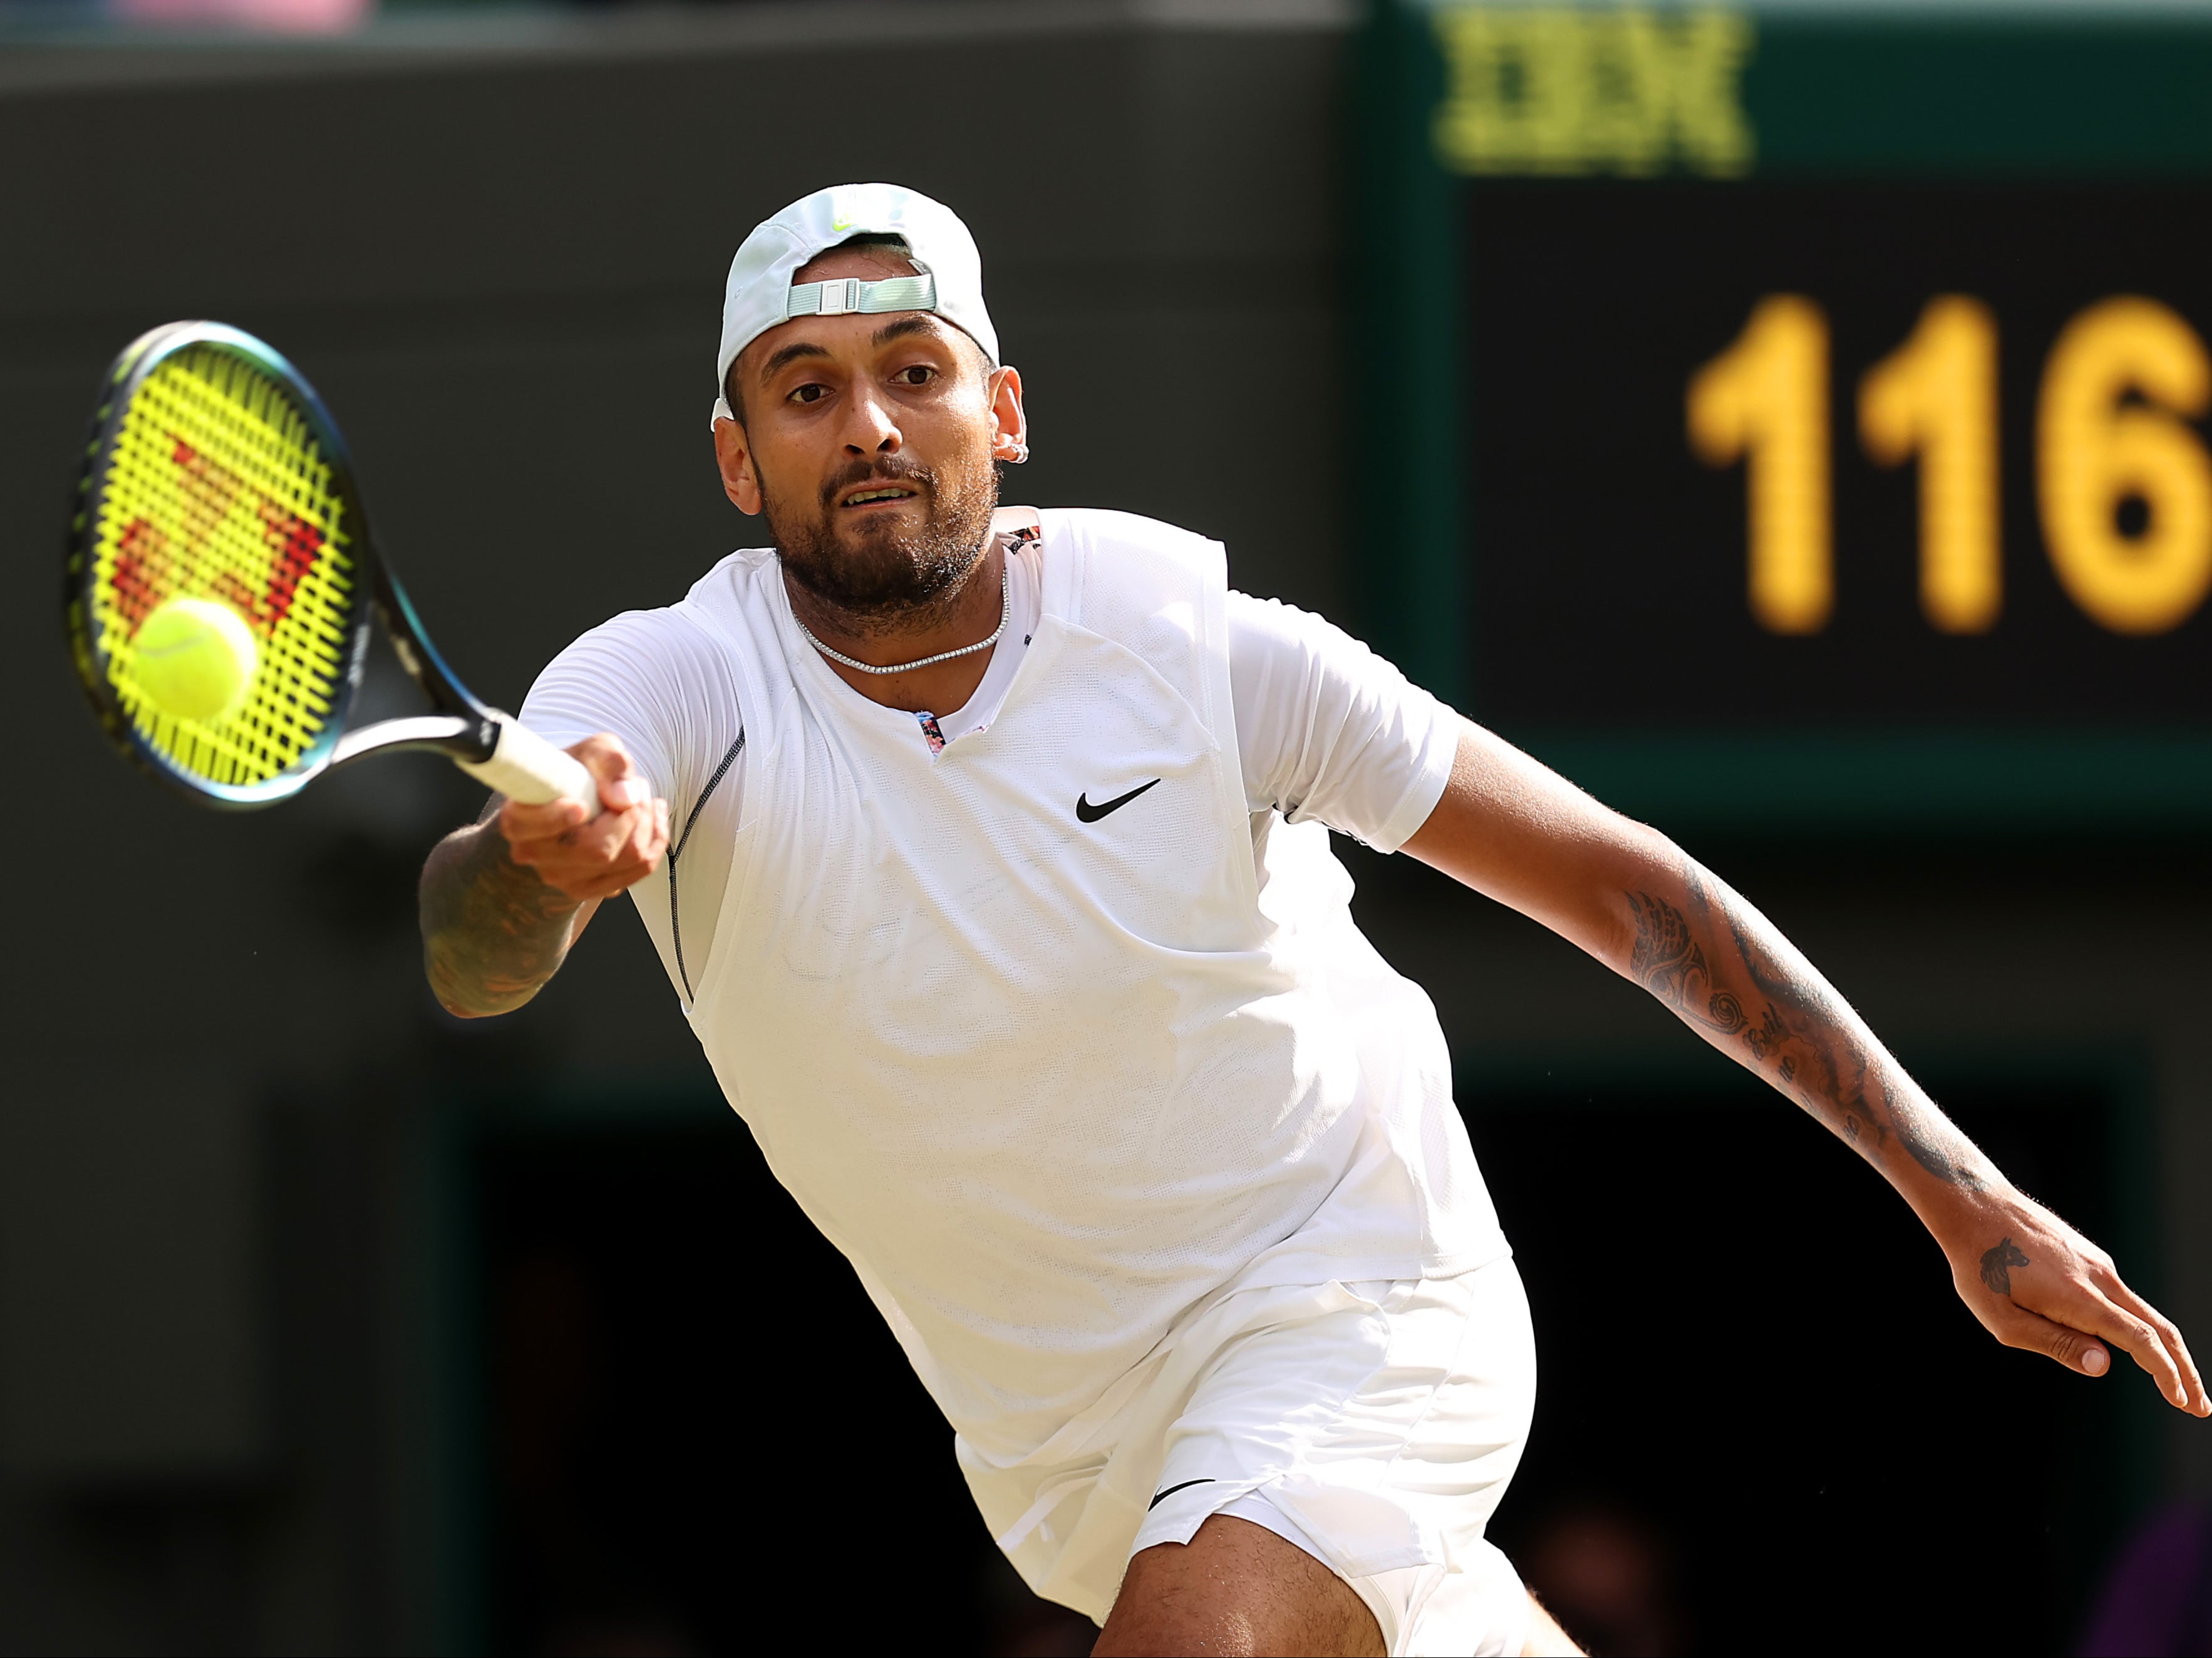 An impressive performance by a restained Kyrgios on Wednesday